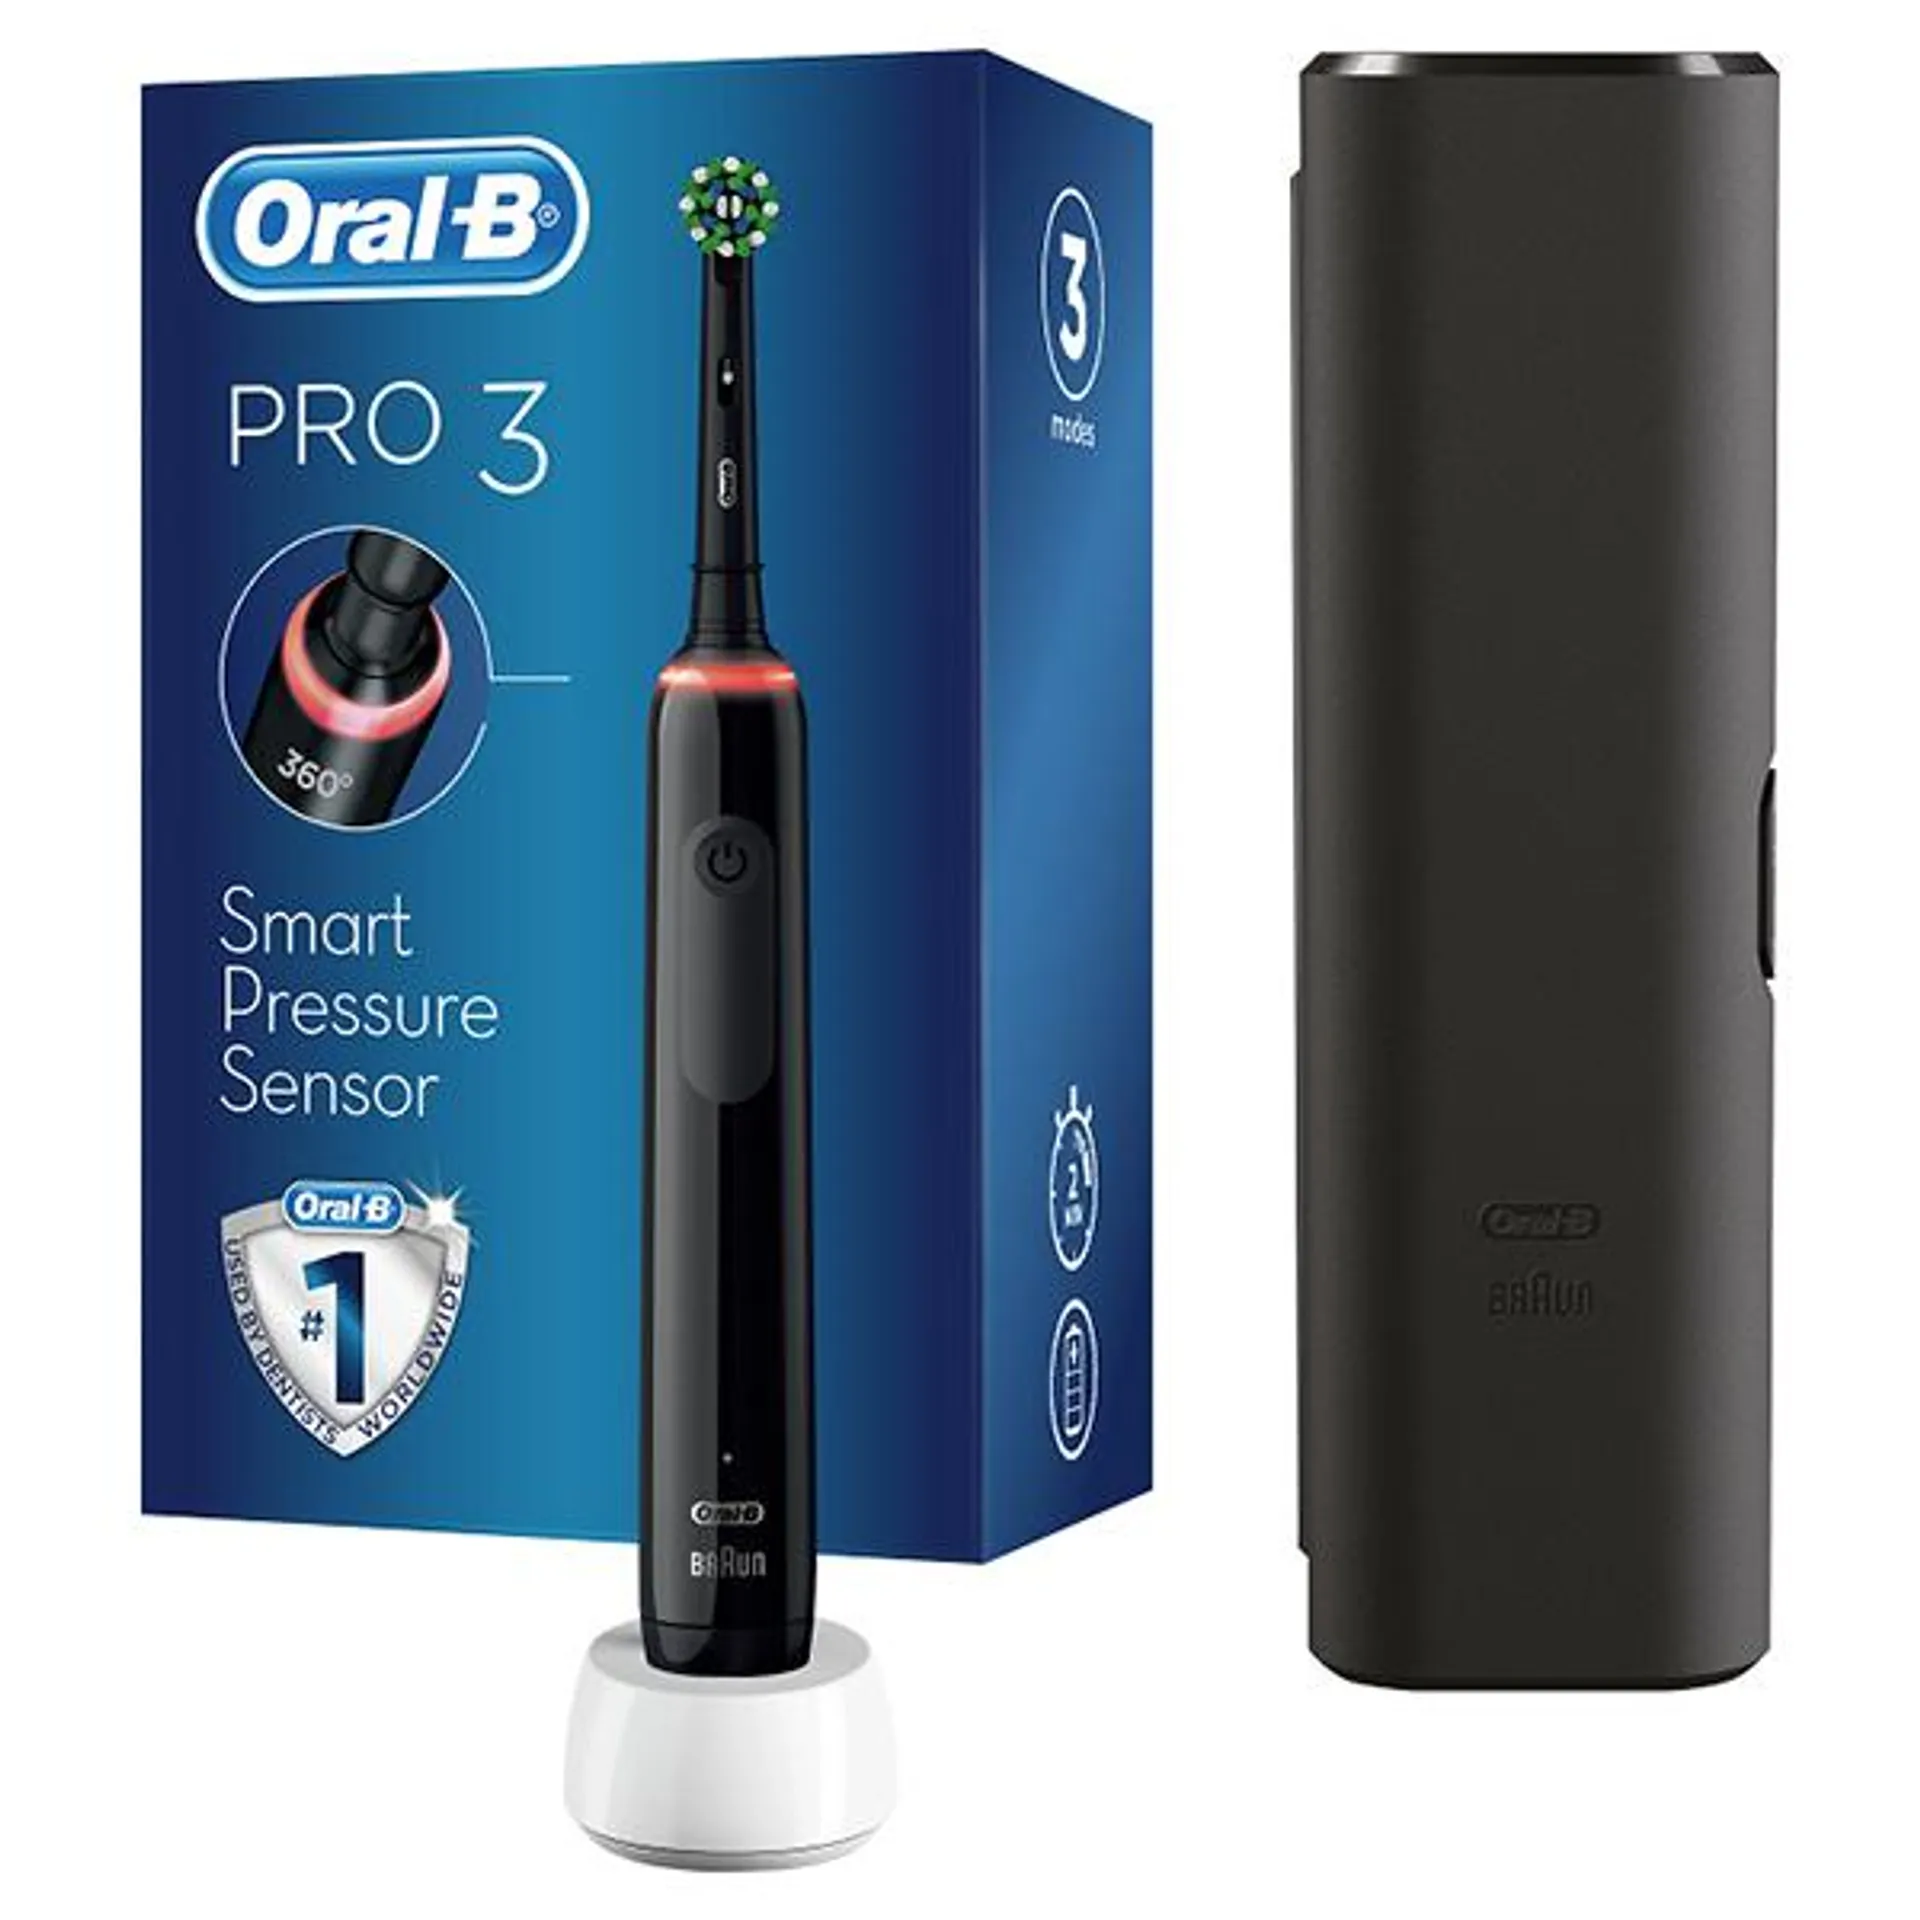 Oral-B Pro 3 3500 CrossAction Black Electric Rechargeable Toothbrush with Travel Case